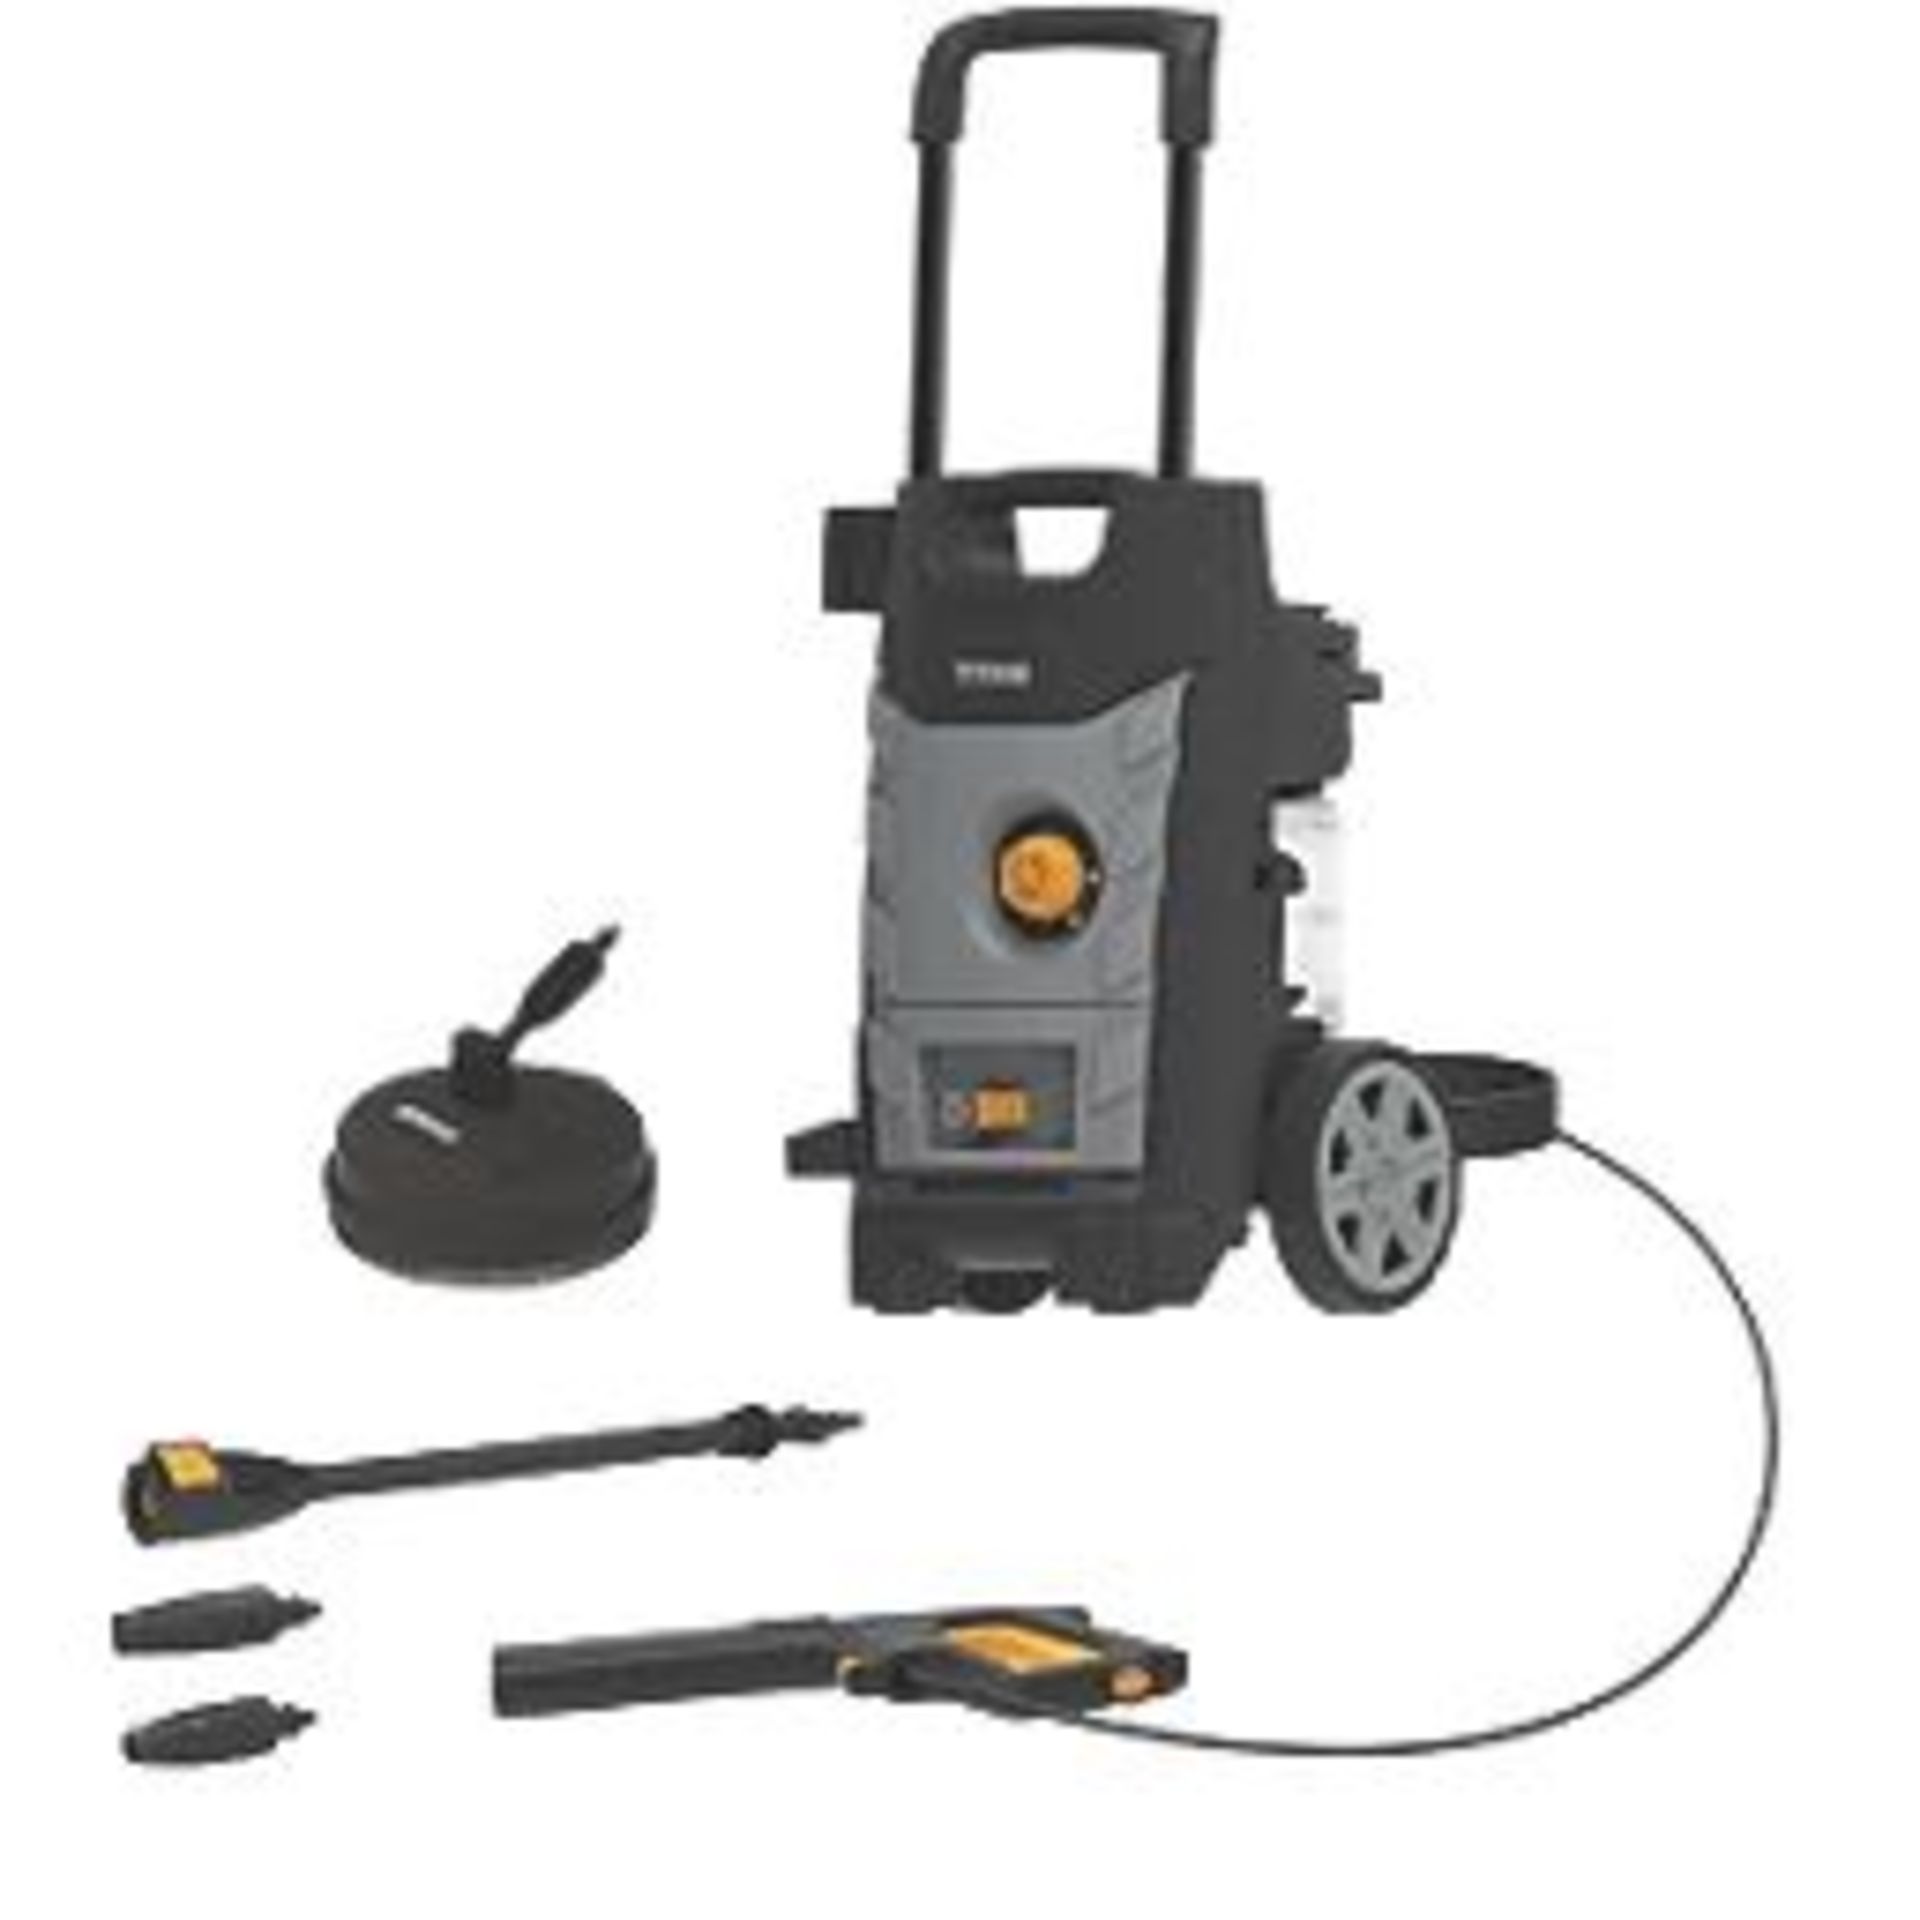 TITAN 140BAR ELECTRIC HIGH PRESSURE WASHER 1.8KW 230V. - R14.13. Compact design with space-saving